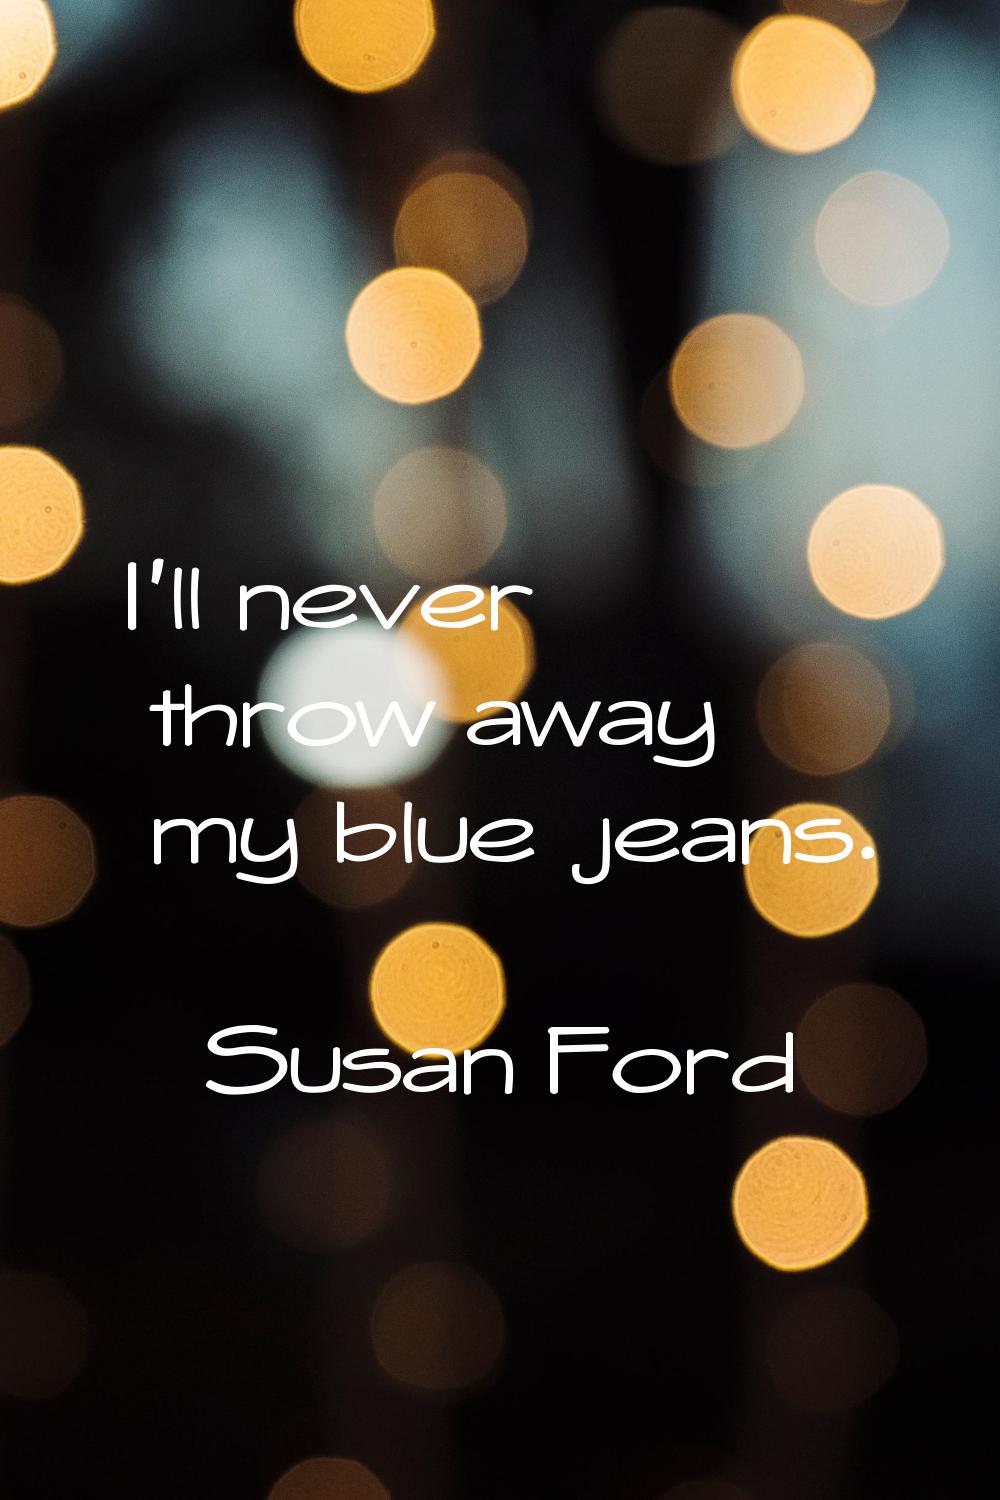 I'll never throw away my blue jeans.